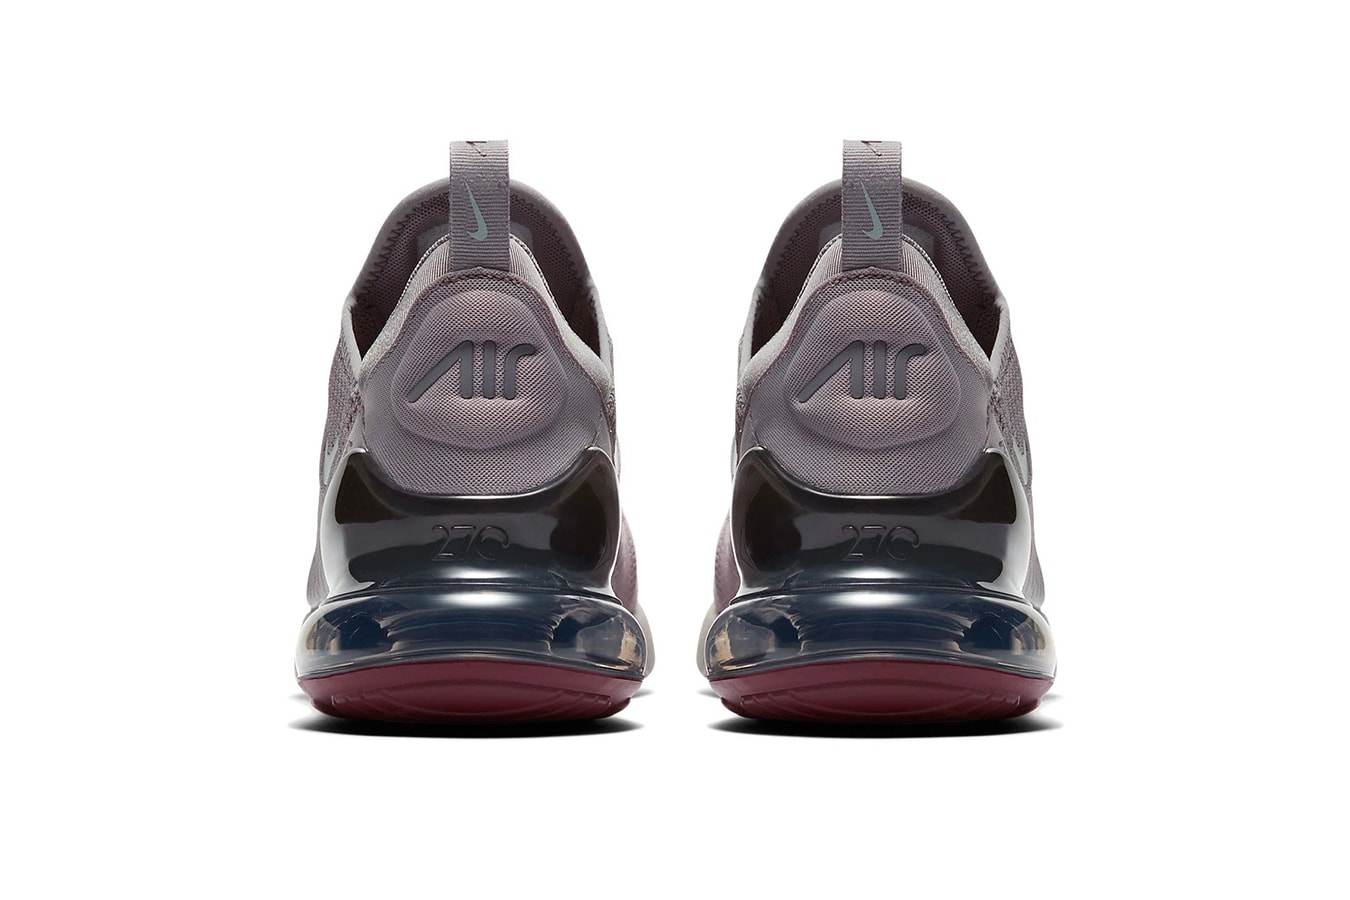 Nike Air Max 270 Burgundy Crush Release Date availability grey silver blue sneakers trainers drop cop how to buy